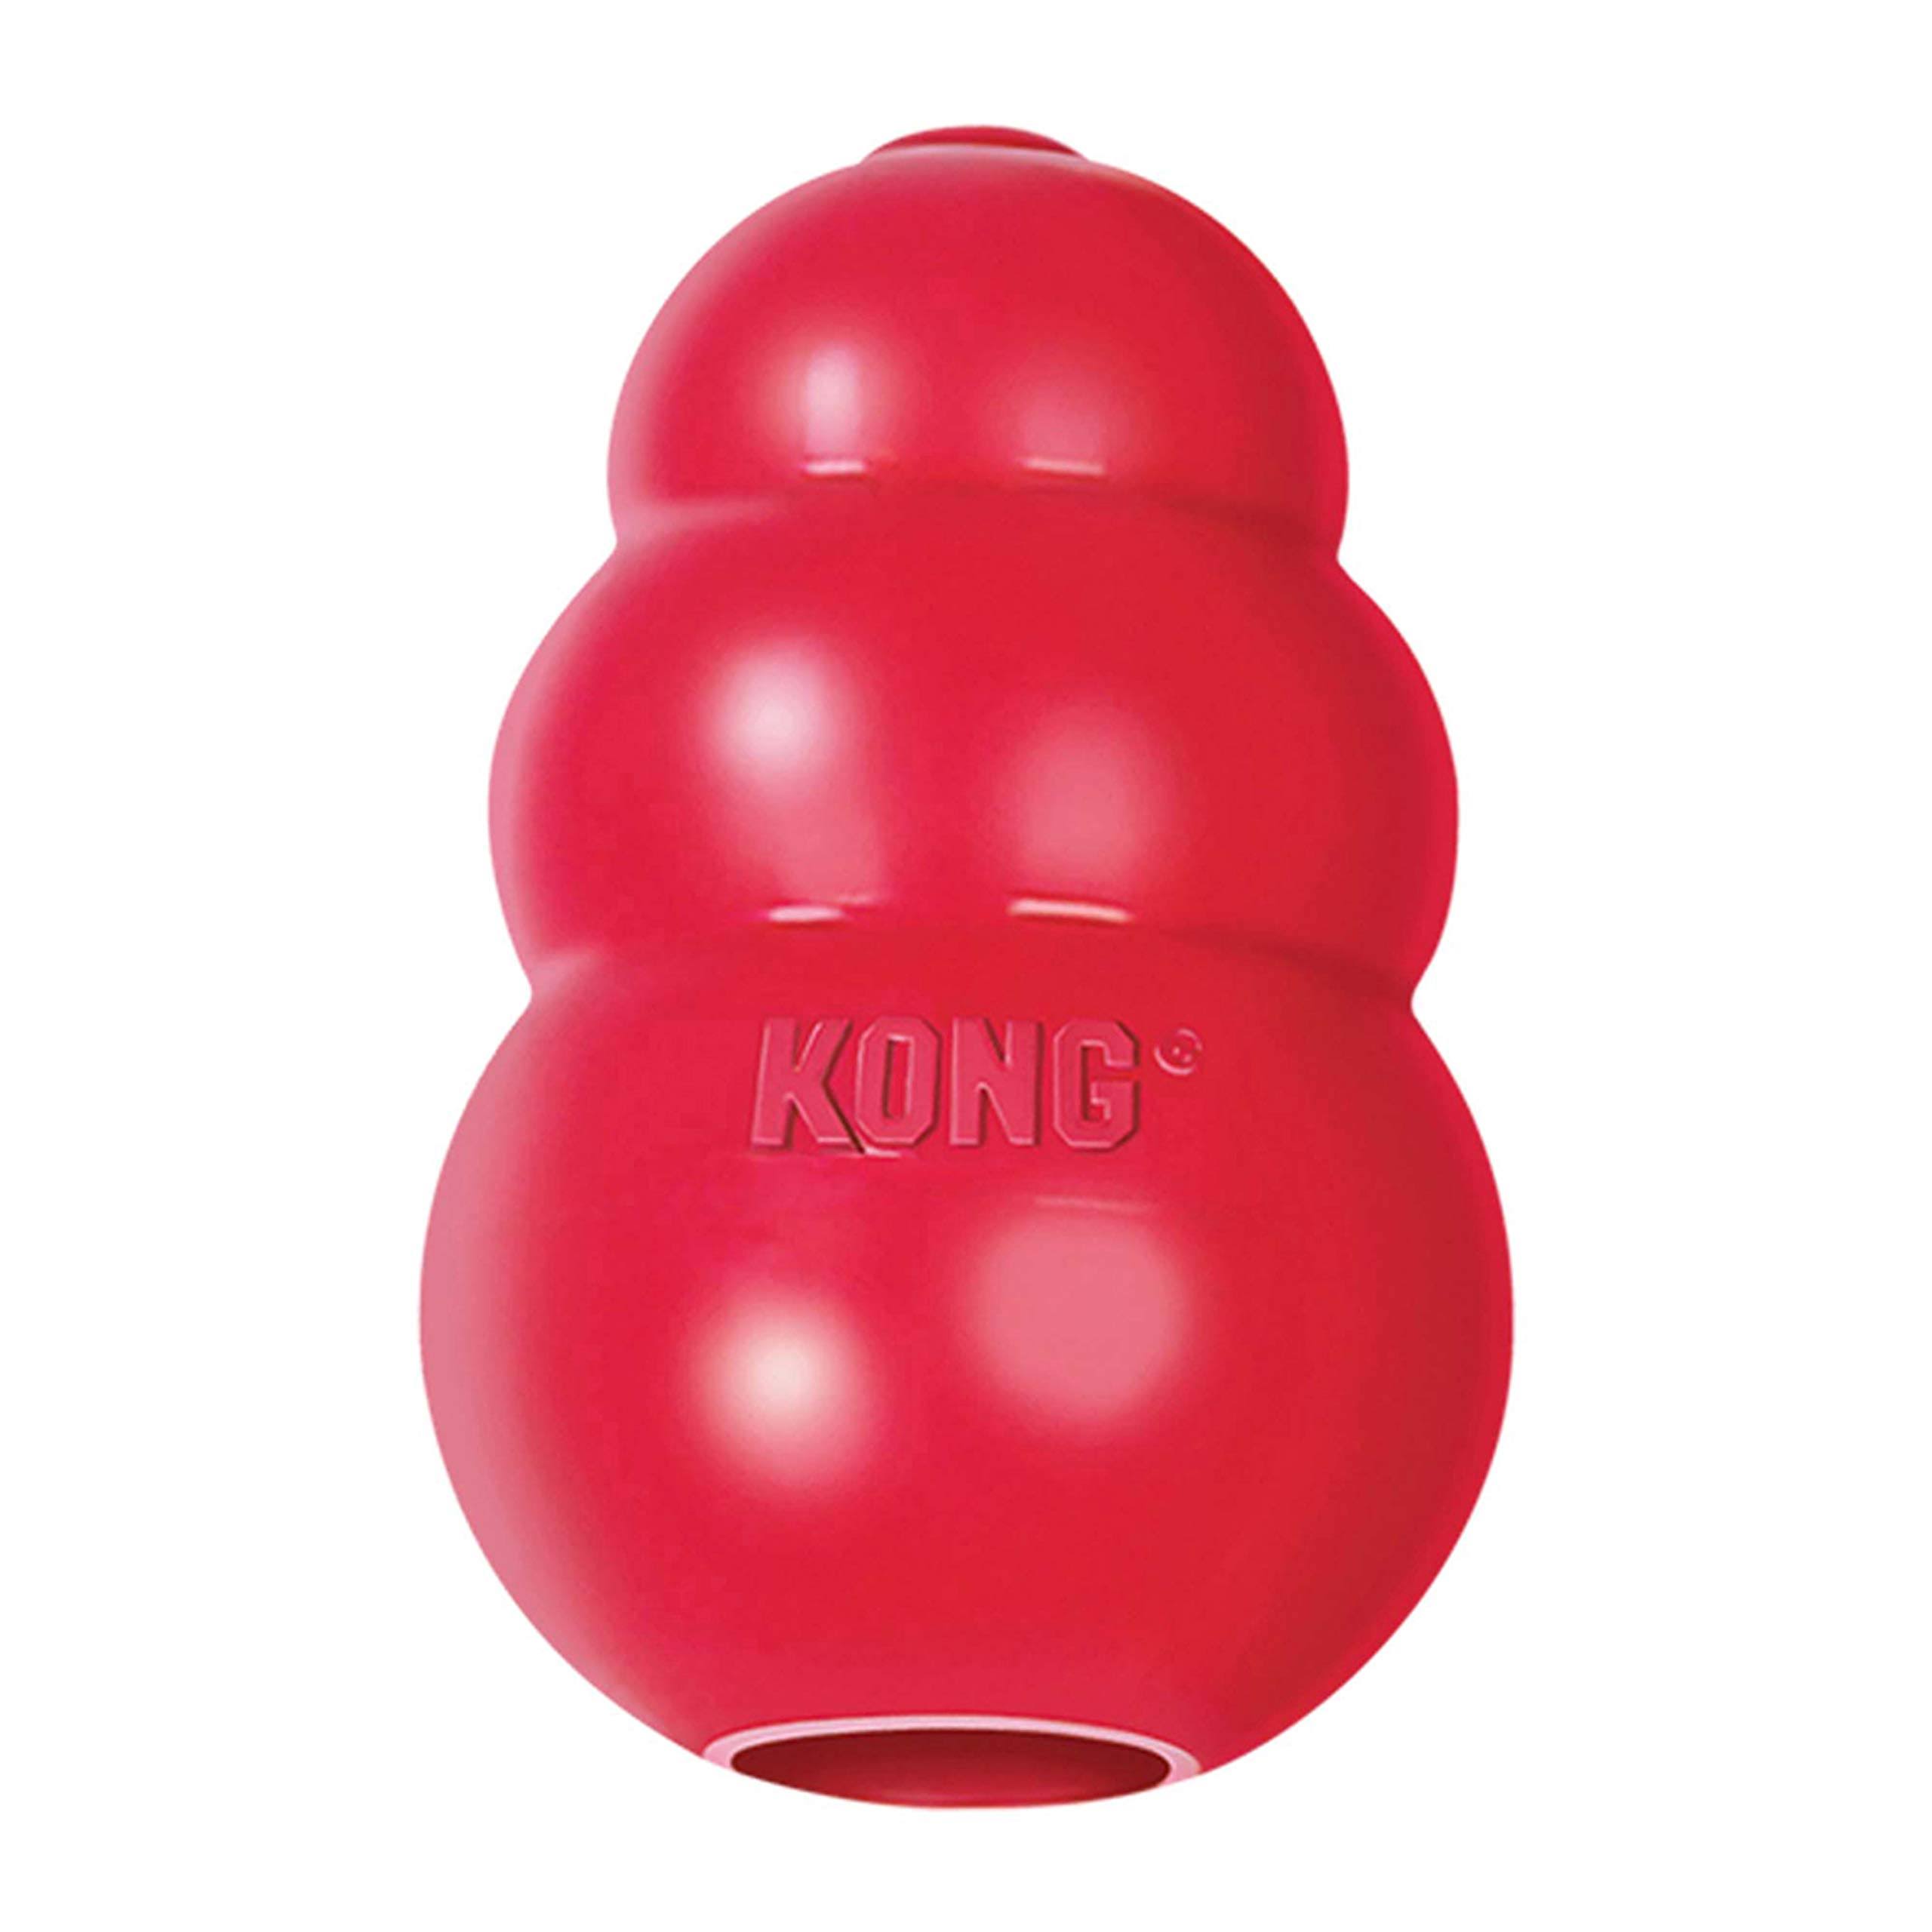 Kong Classic Dog Toy - XX-Large, Red